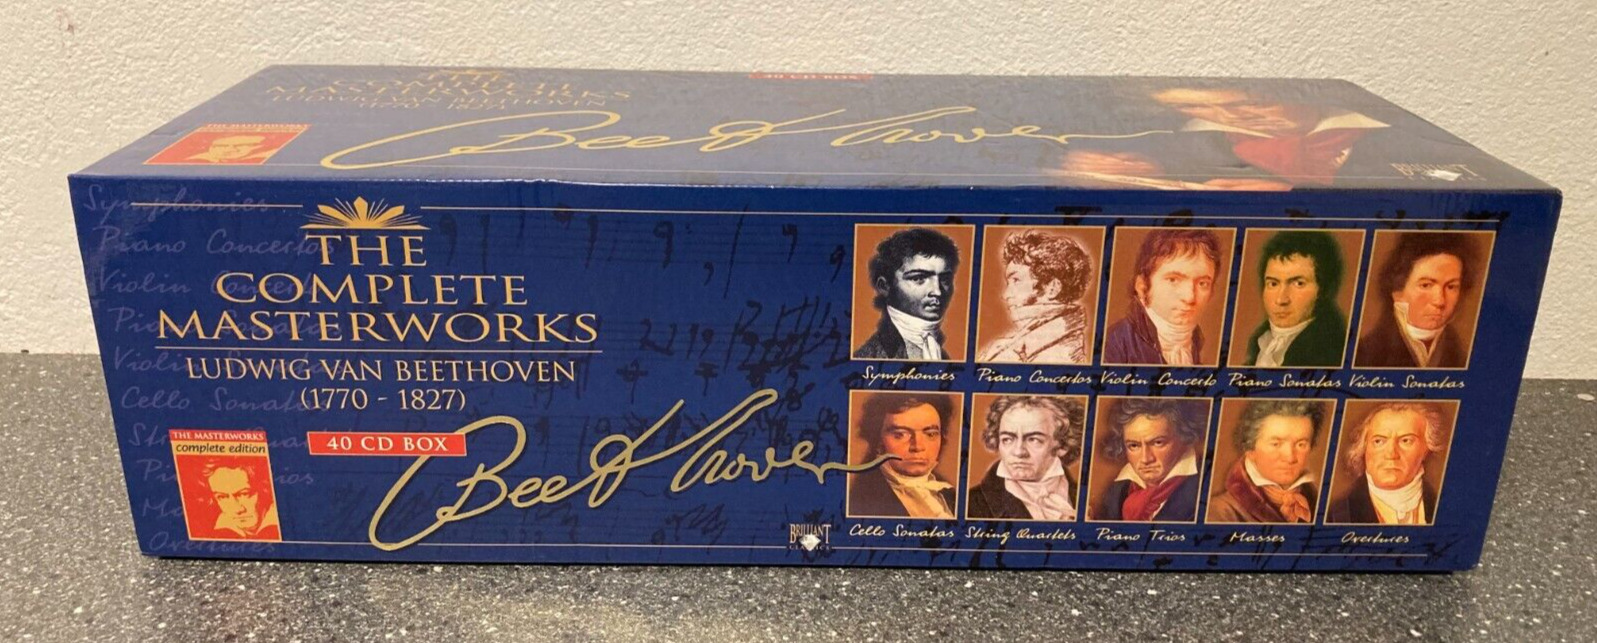 Ludwig Van Beethoven The Complete Masterworks 40 CD Box Set Near Mint Condition